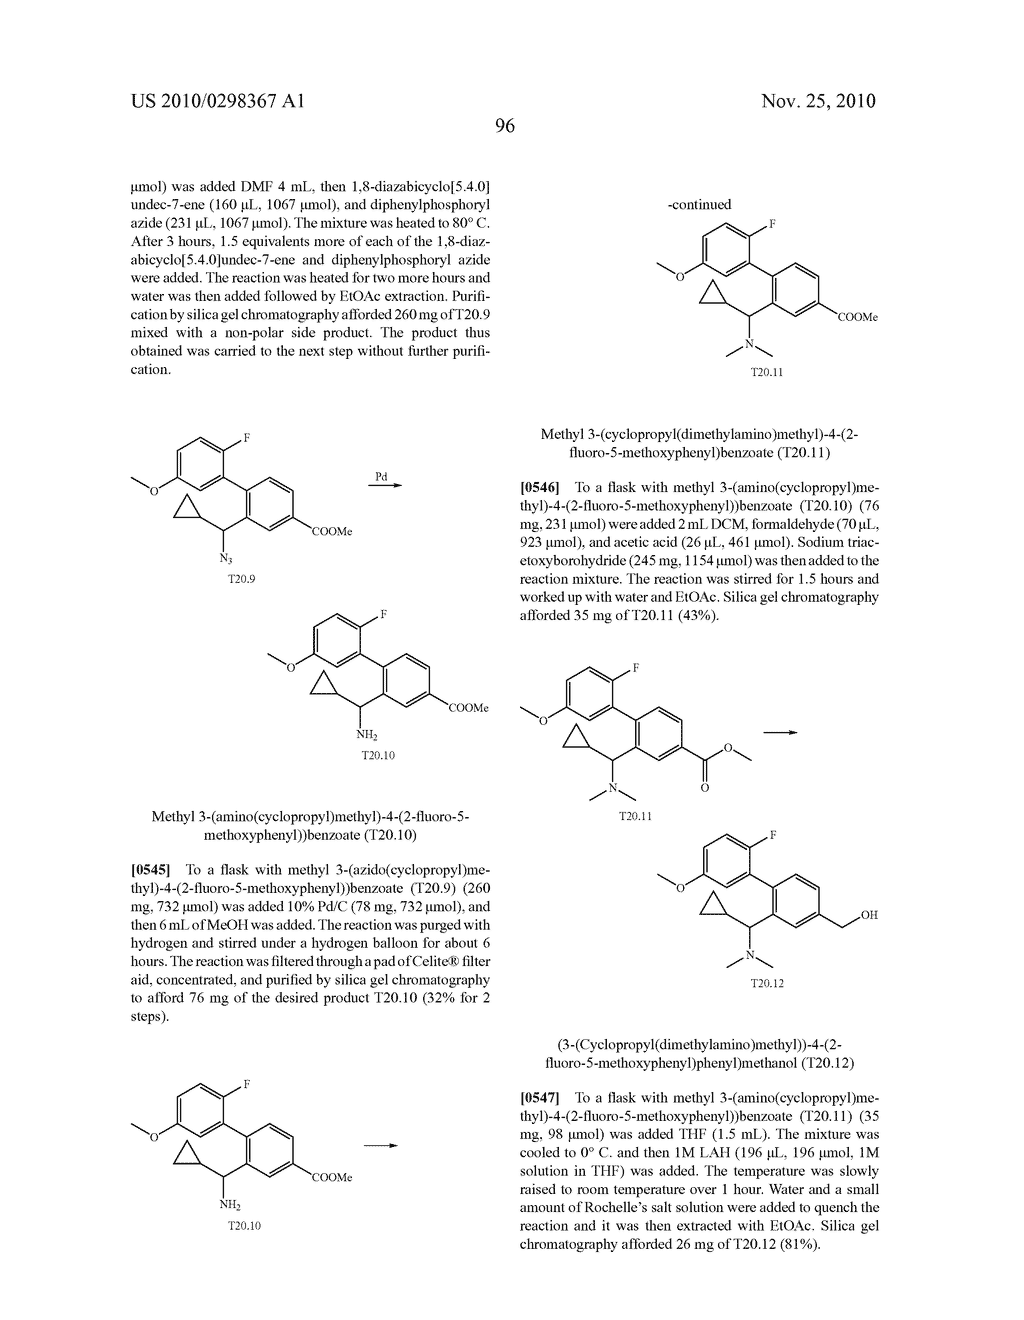 Conformationally Constrained Carboxylic Acid Derivatives Useful for Treating Metabolic Disorders - diagram, schematic, and image 98